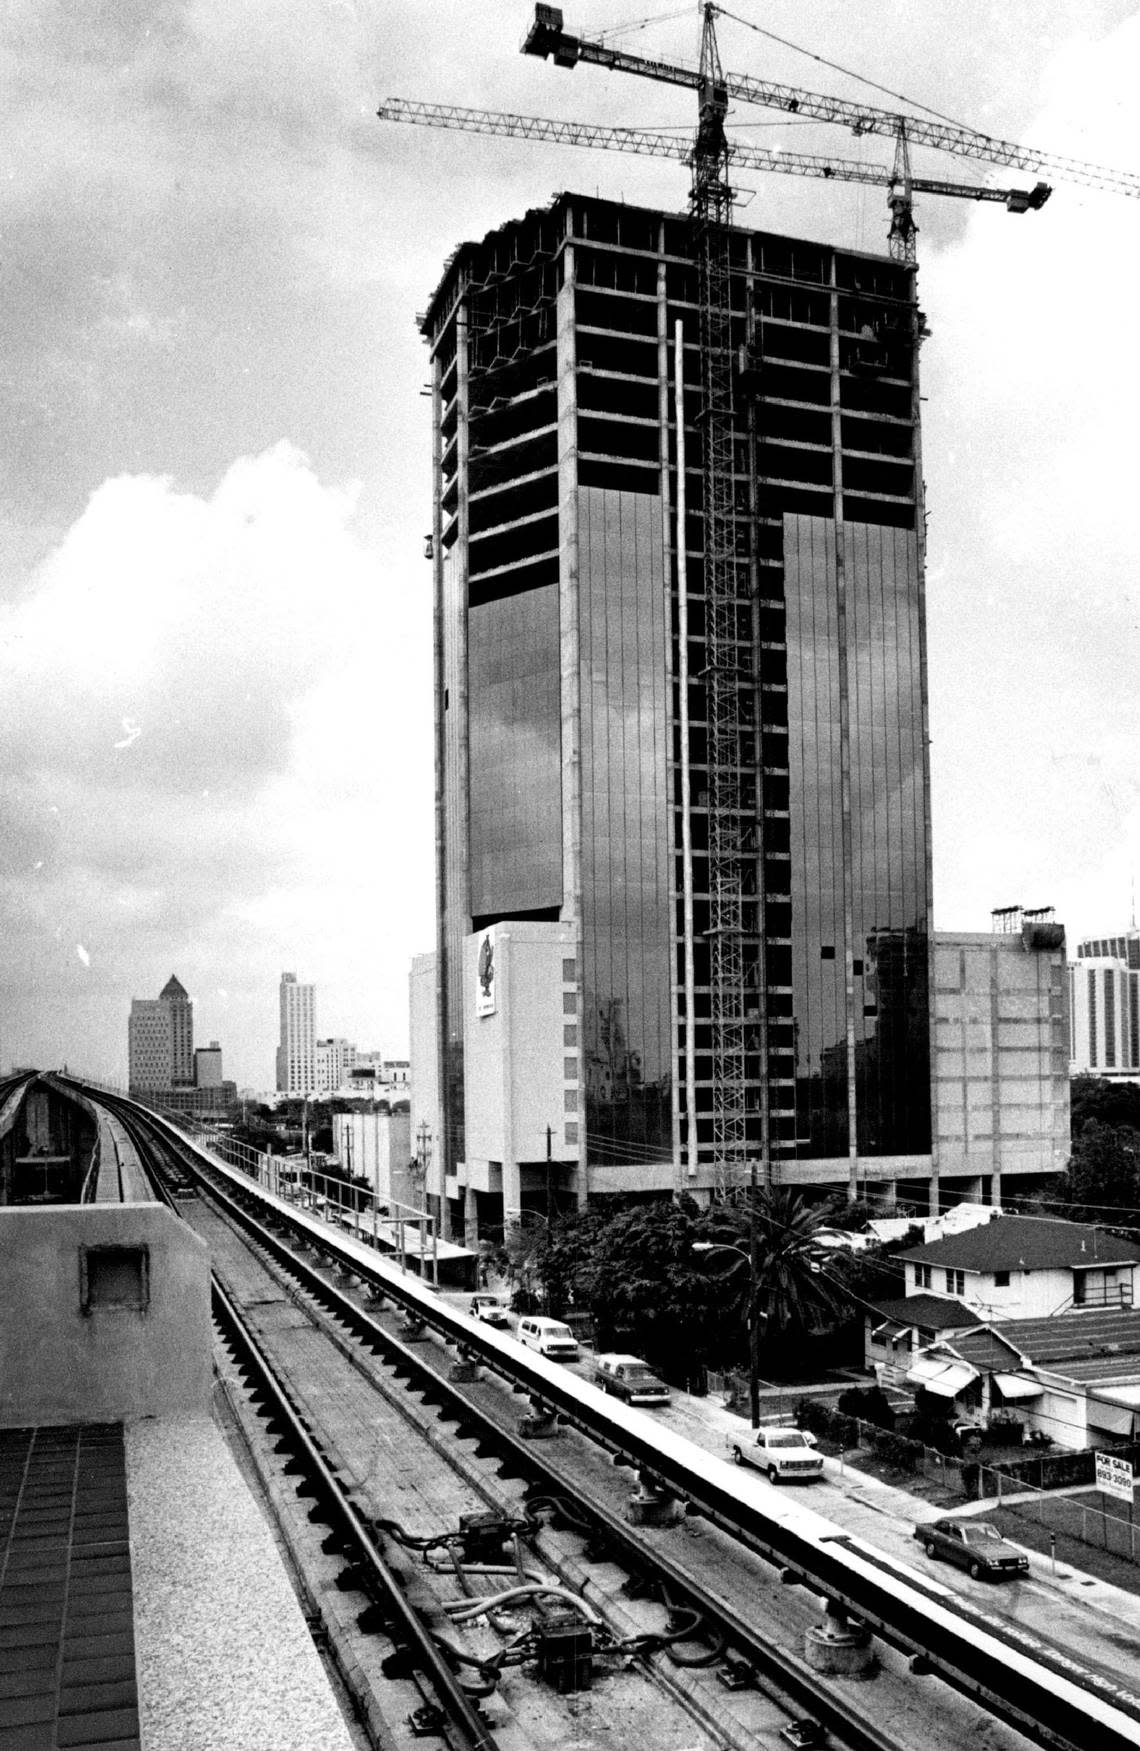 The 27-story Brickell Station towers bear Brickell Metrorail station.